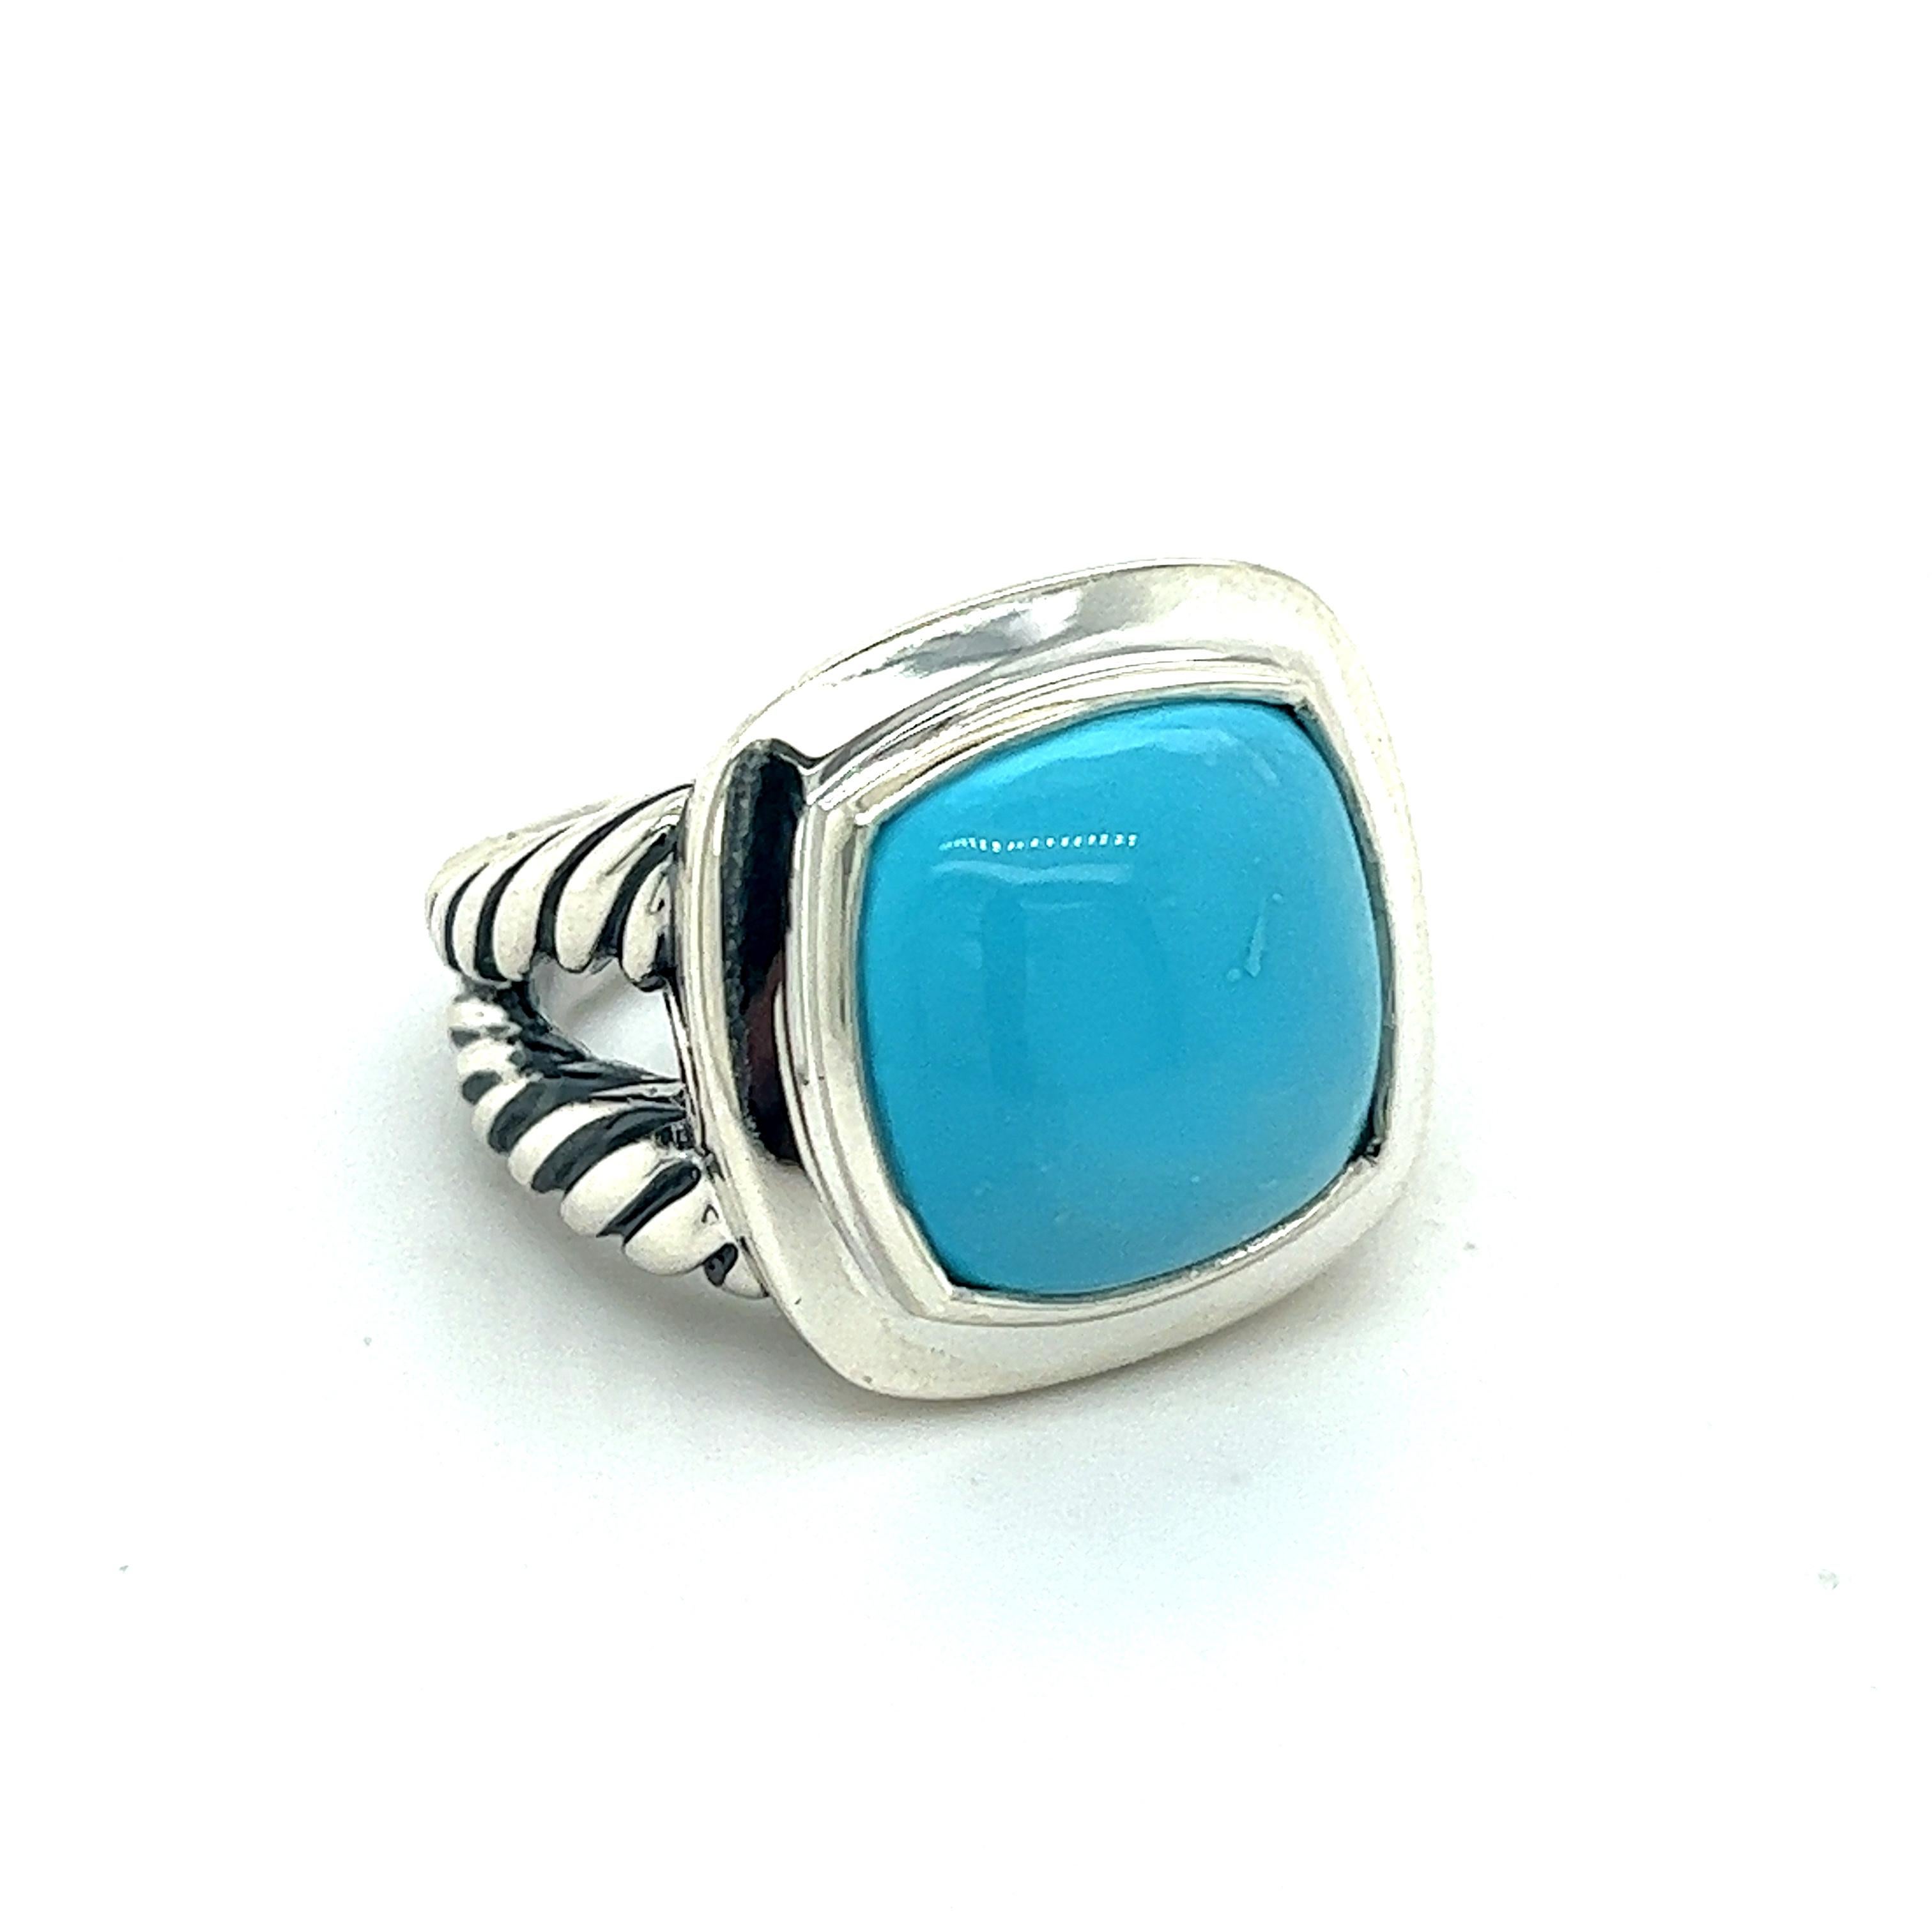 Authentic David Yurman Estate Turquoise Albion Ring 6.75 Silver DY290

Retail: $790

Ring from ALBION COLLECTION

This elegant Authentic David Yurman ring is made of sterling silver.

TRUSTED SELLER SINCE 2002

PLEASE SEE OUR HUNDREDS OF POSITIVE